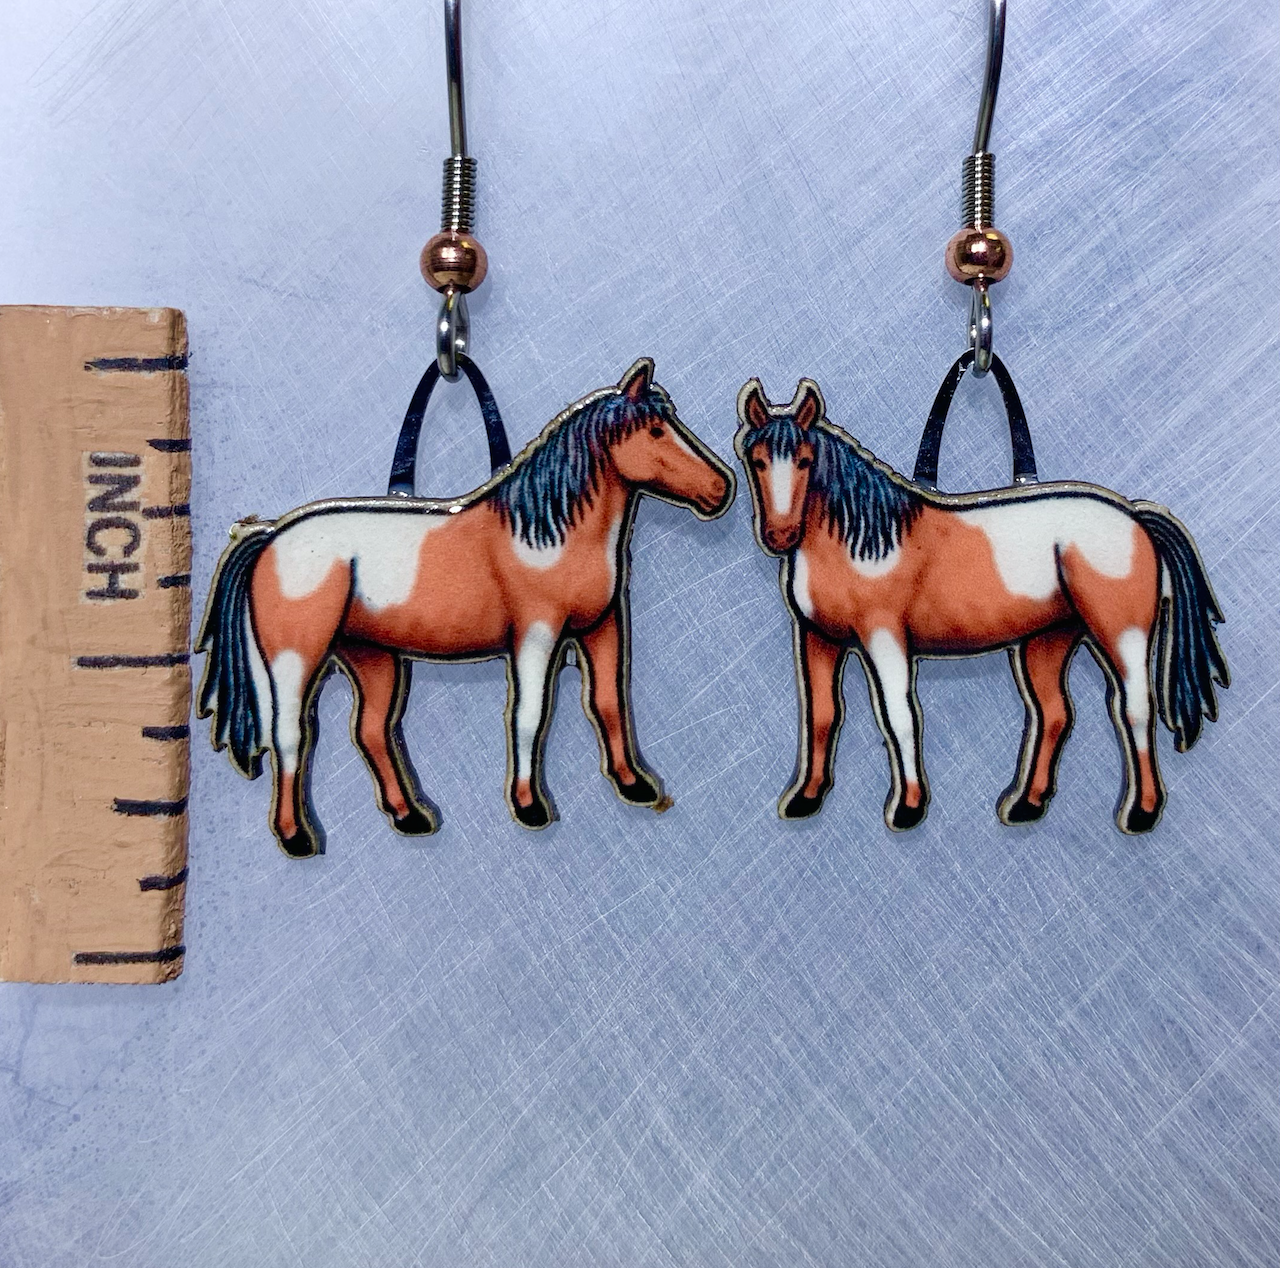 Picture shown is of 1 inch tall pair of earrings of the animal the Wild Pony.